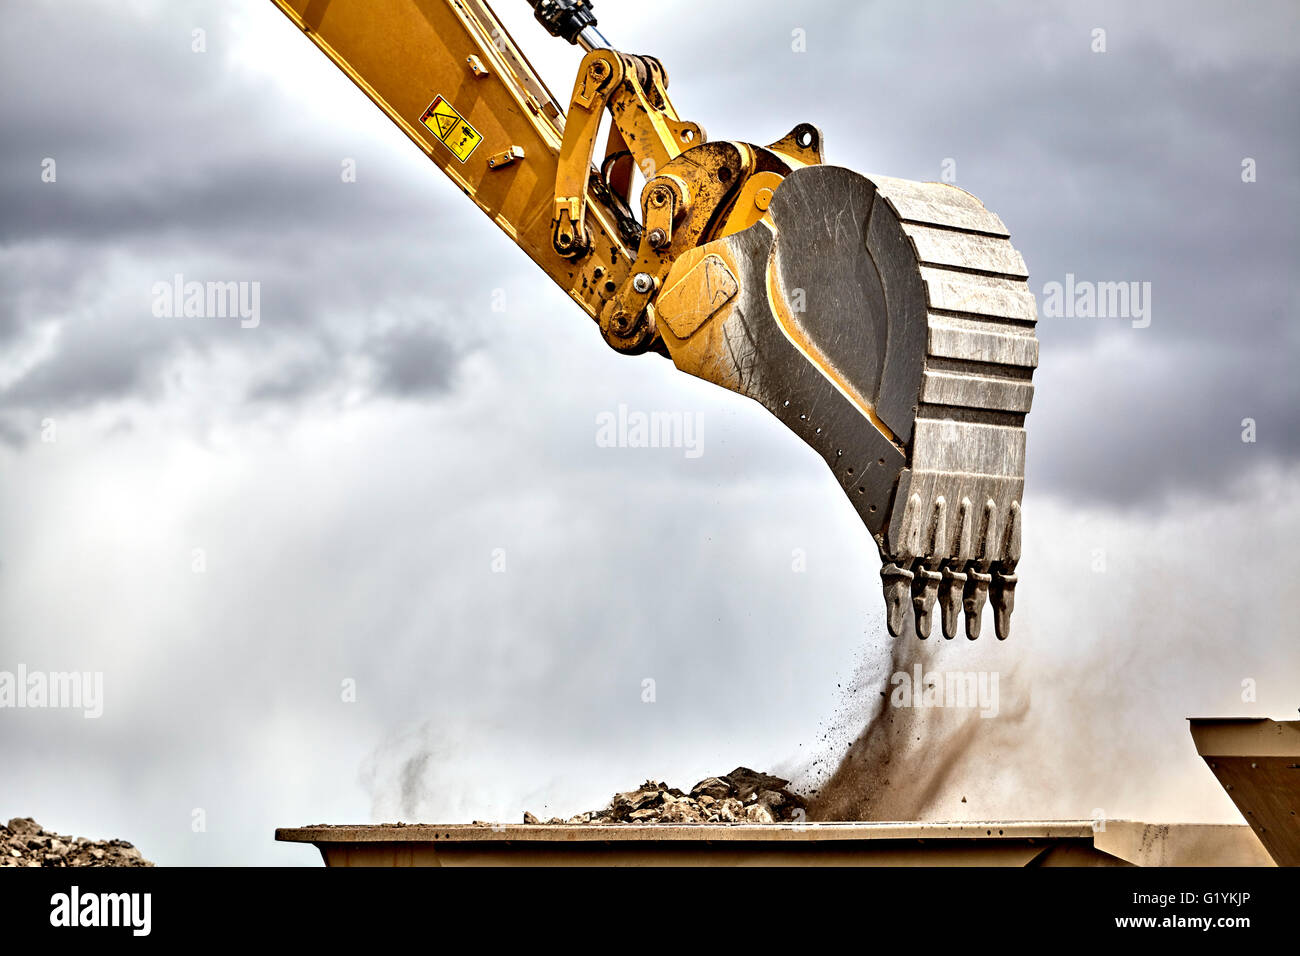 Construction industry heavy equipment excavator moving gravel at jobsite quarry with stormy skies Stock Photo